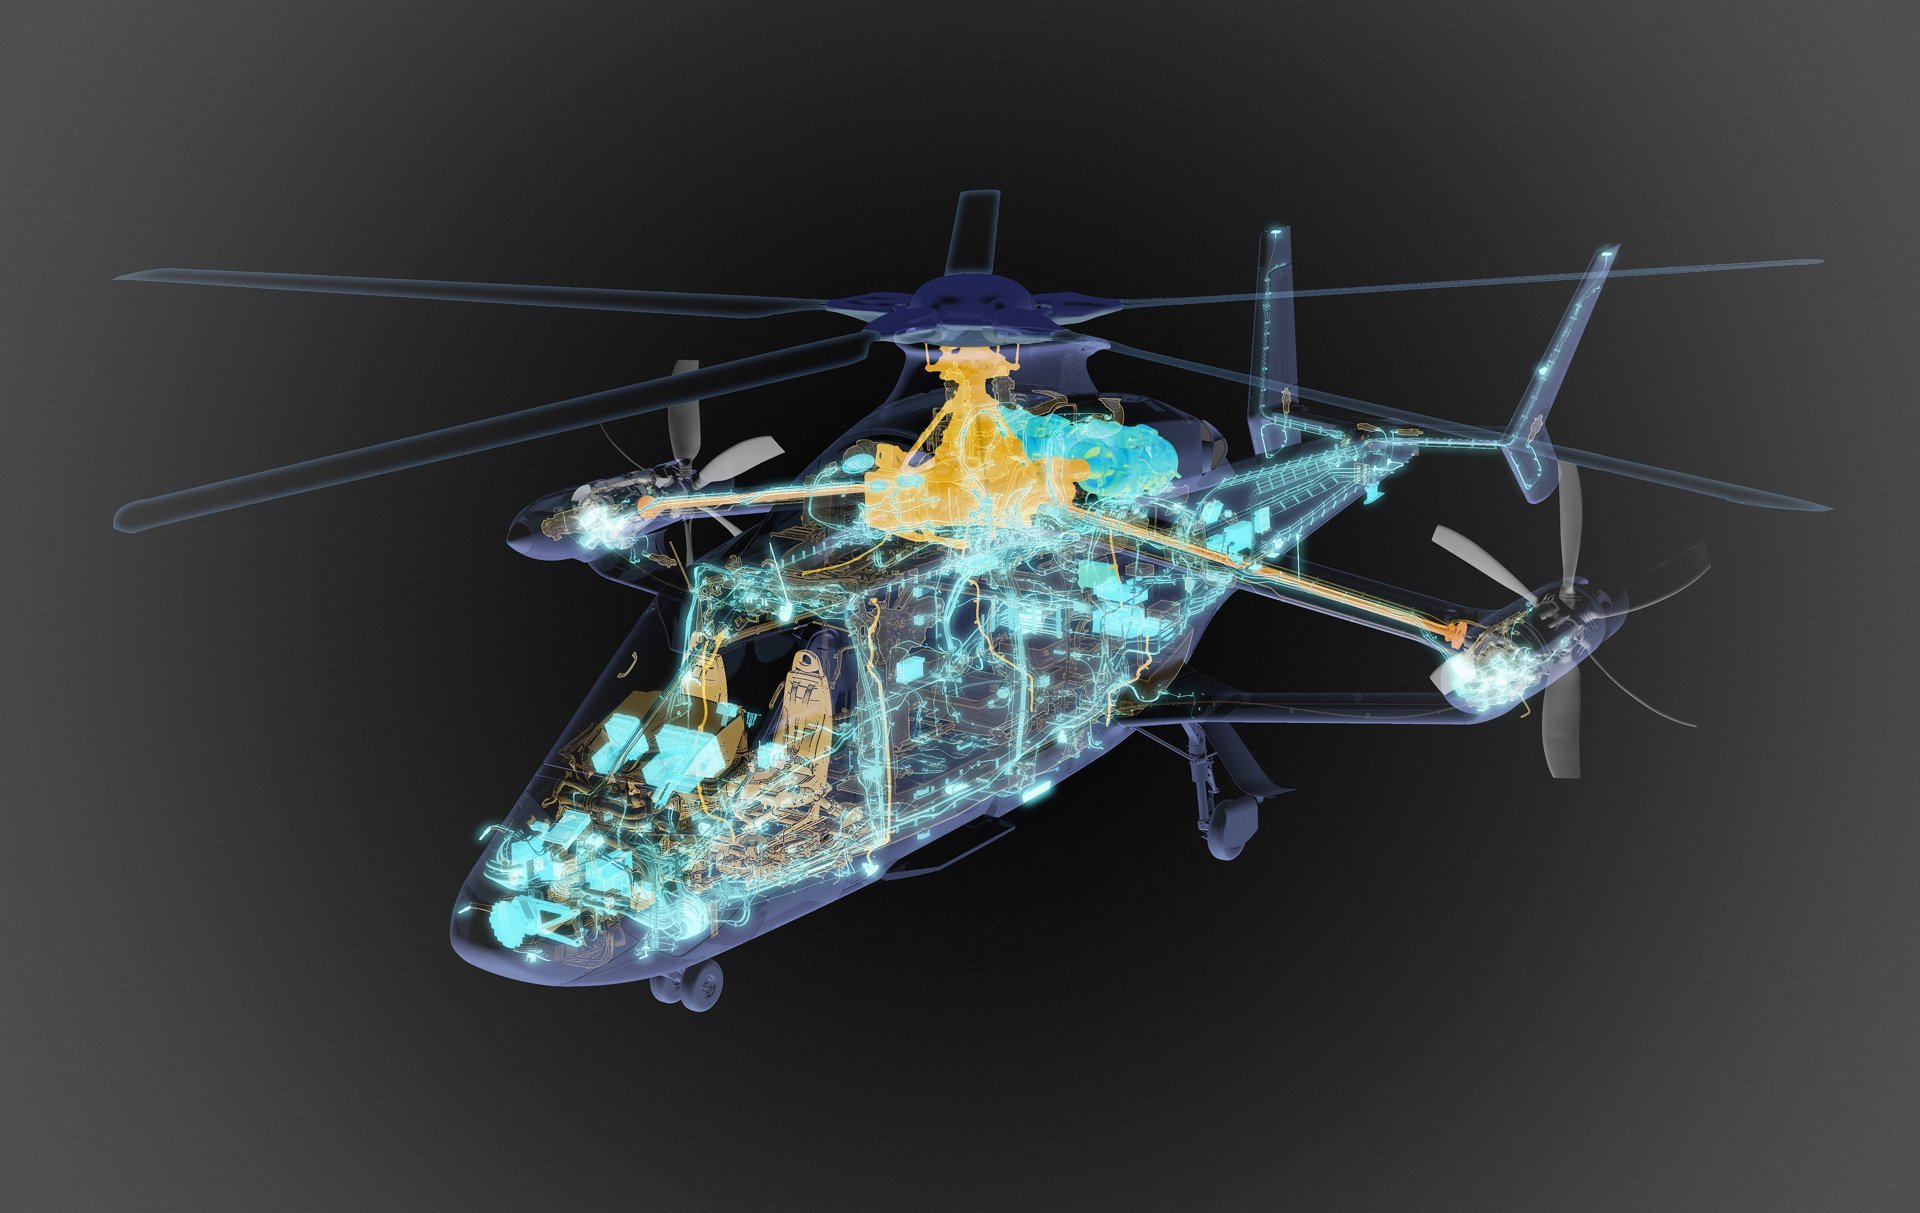 Airbus Racer high speed chopper achieves preliminary design review